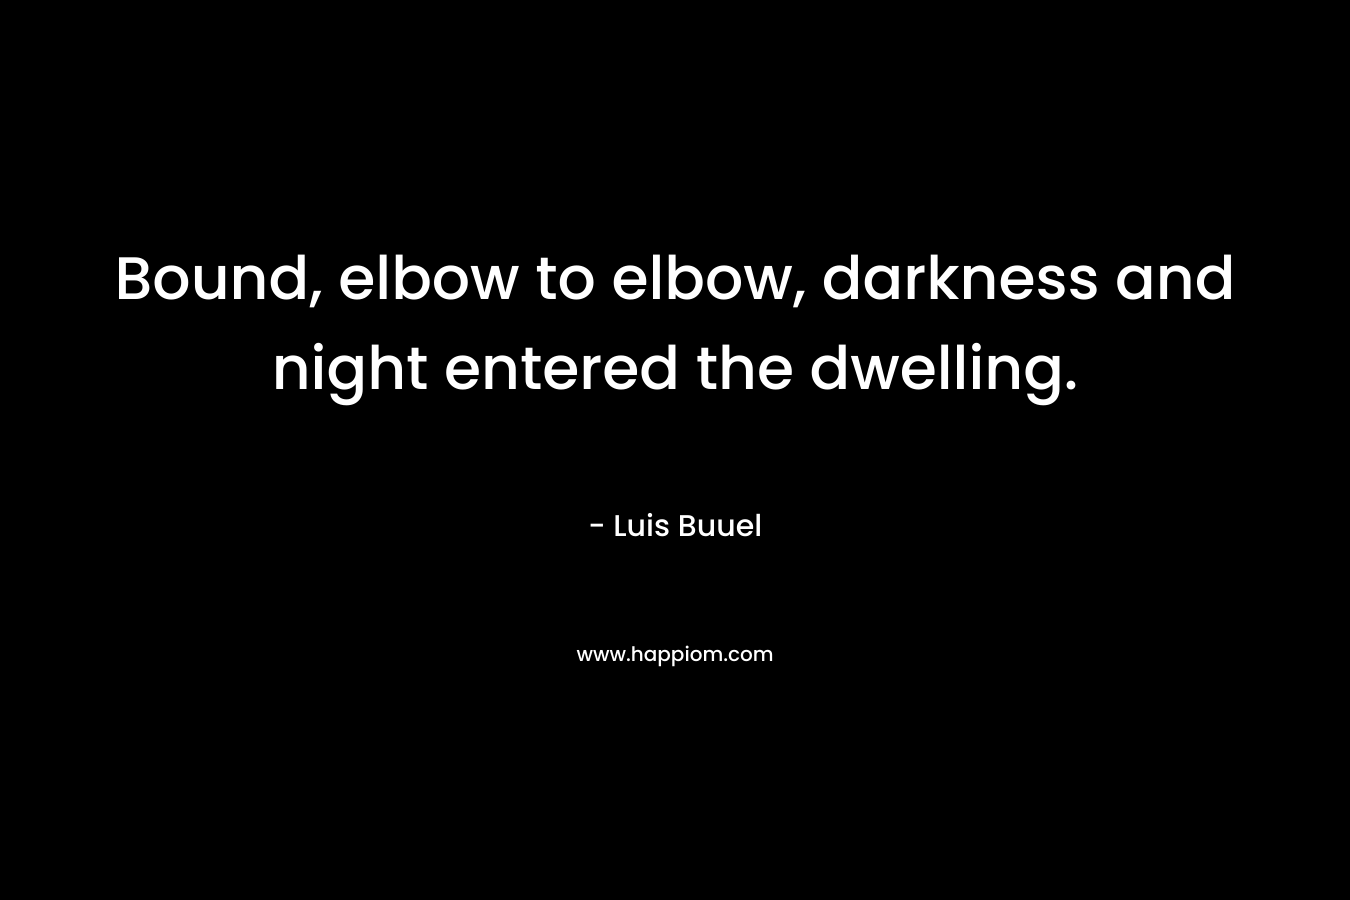 Bound, elbow to elbow, darkness and night entered the dwelling. – Luis Buuel